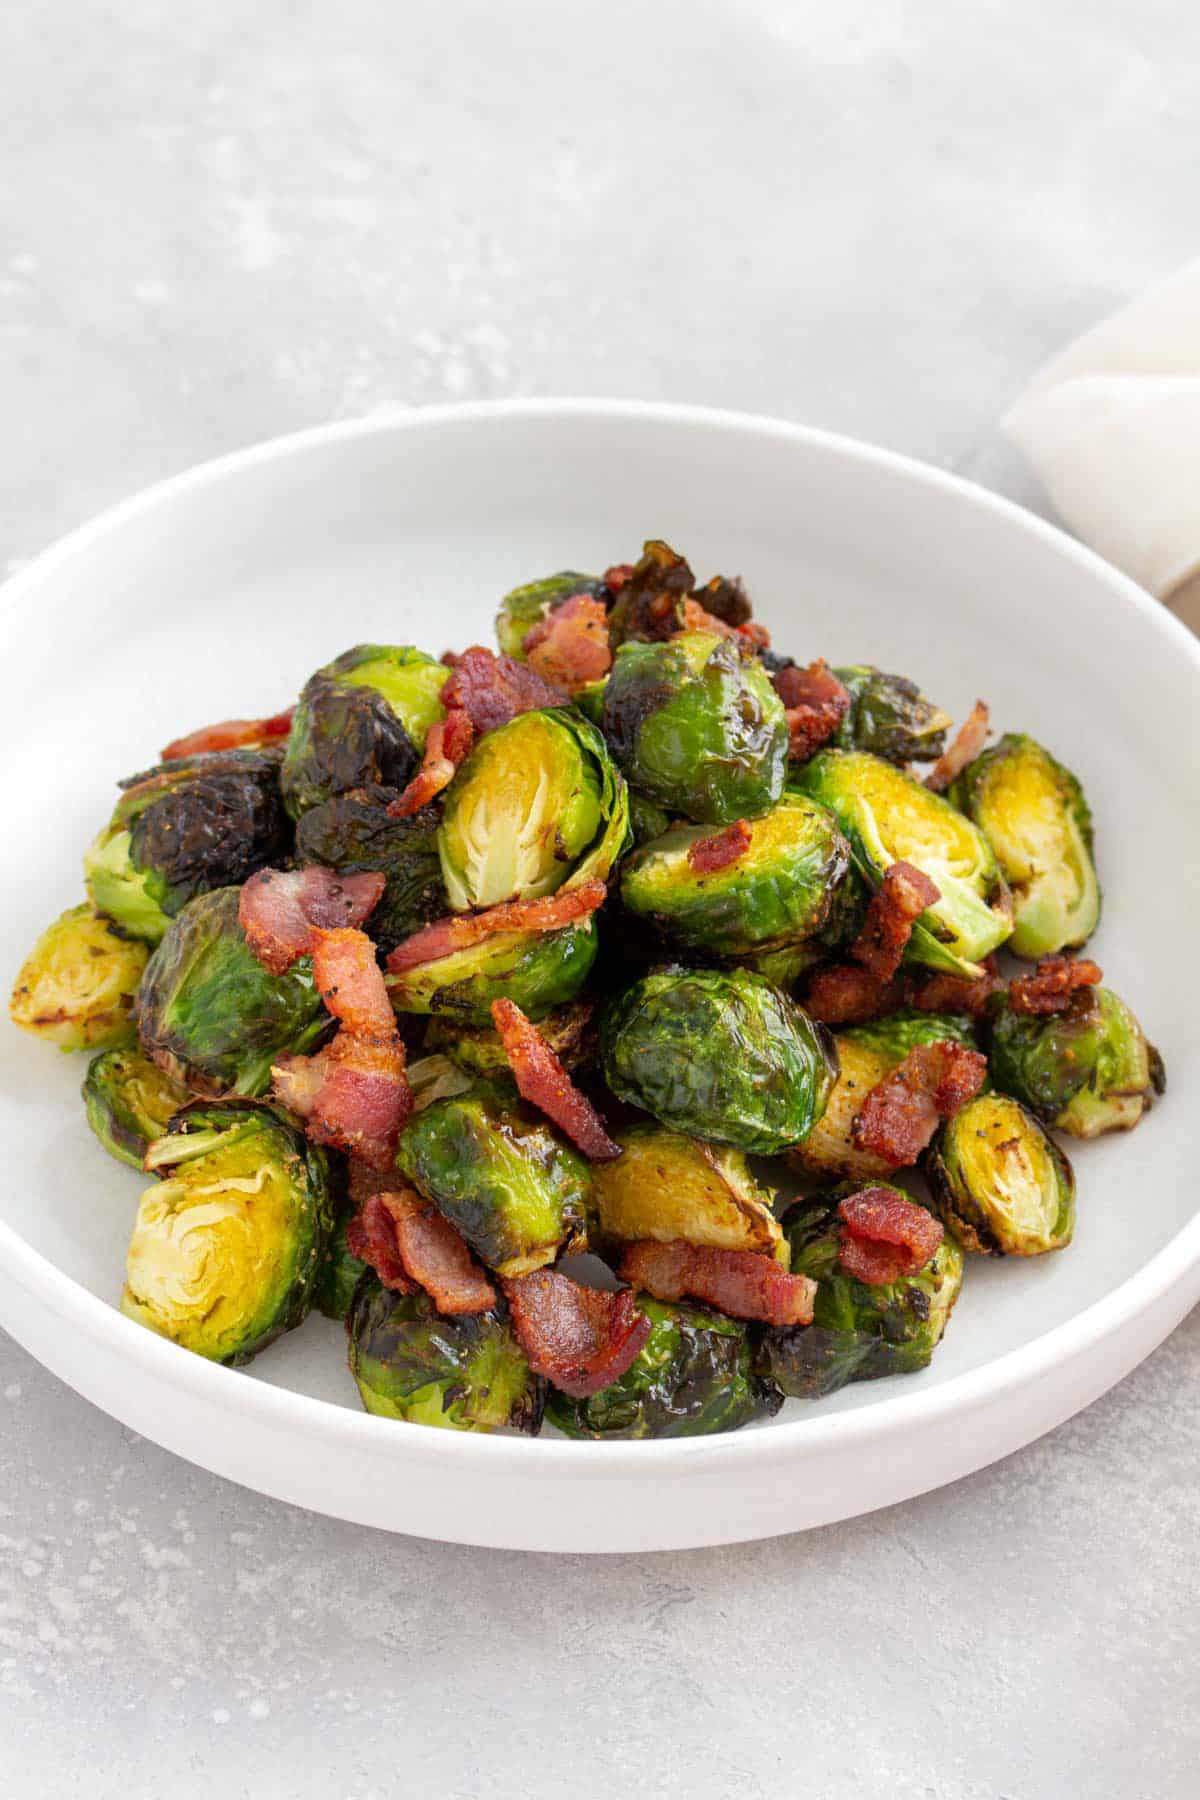 An angled view of a plate of air fryer brussels sprouts and bacon.